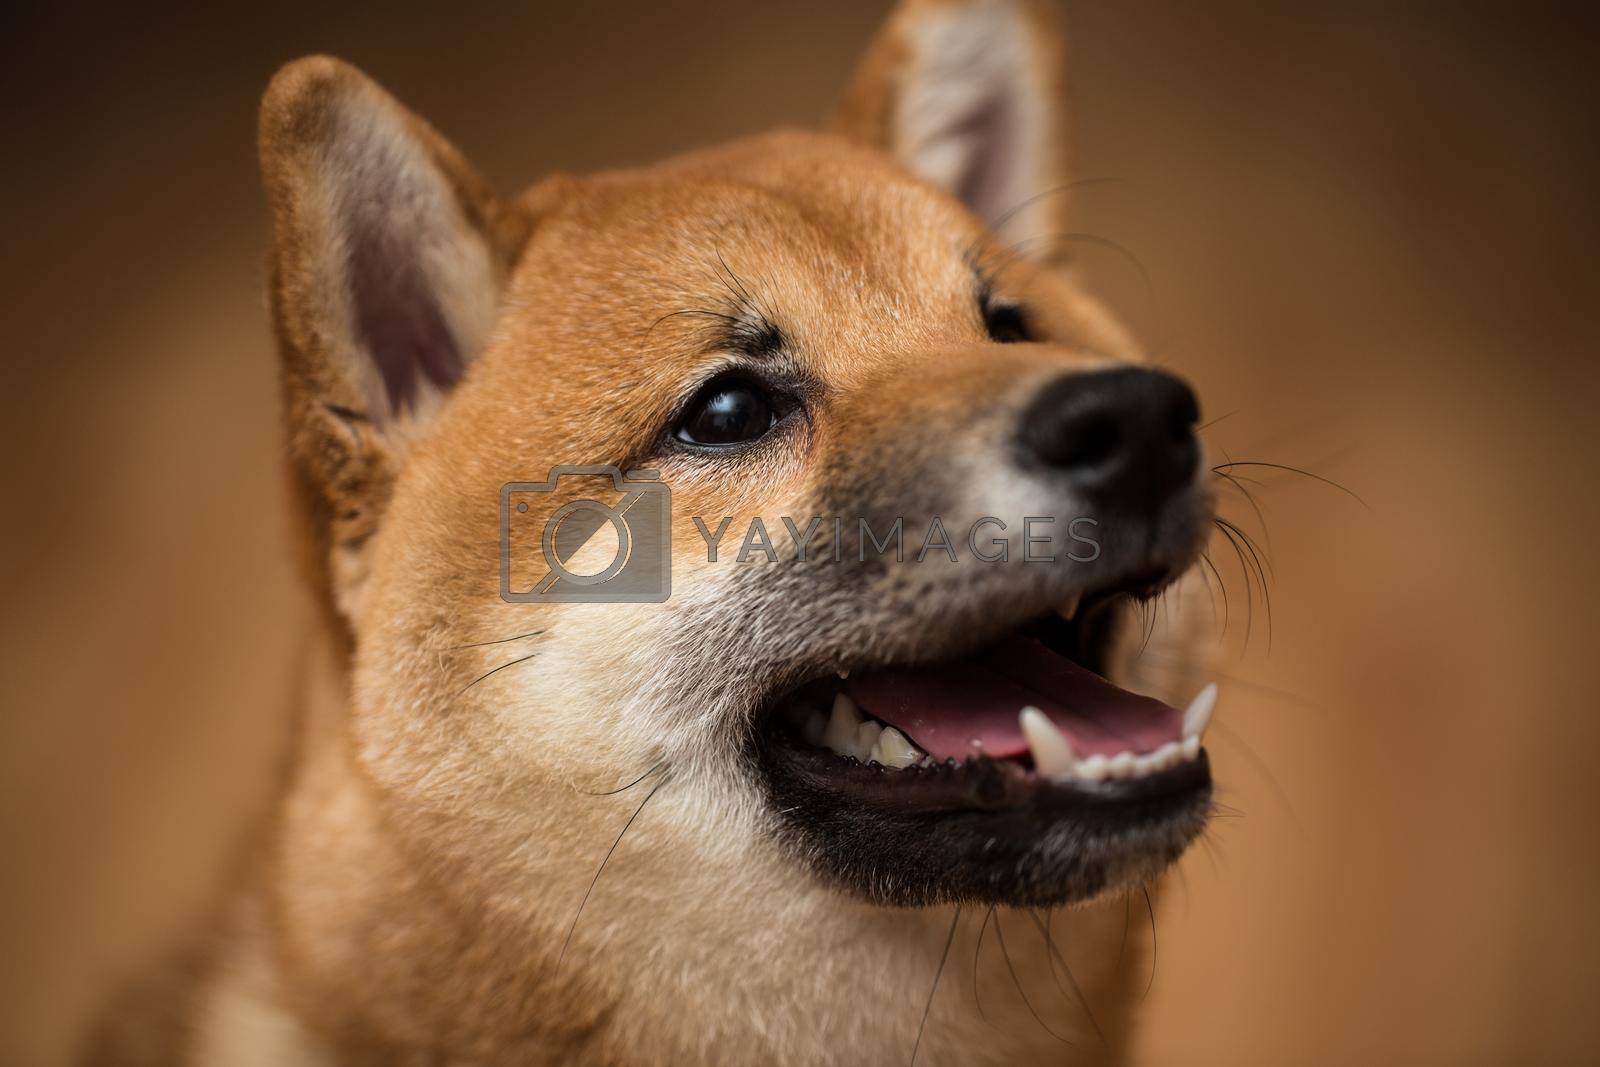 Royalty free image of Portrait of a dog Shiba Inu, front view. by StudioPeace